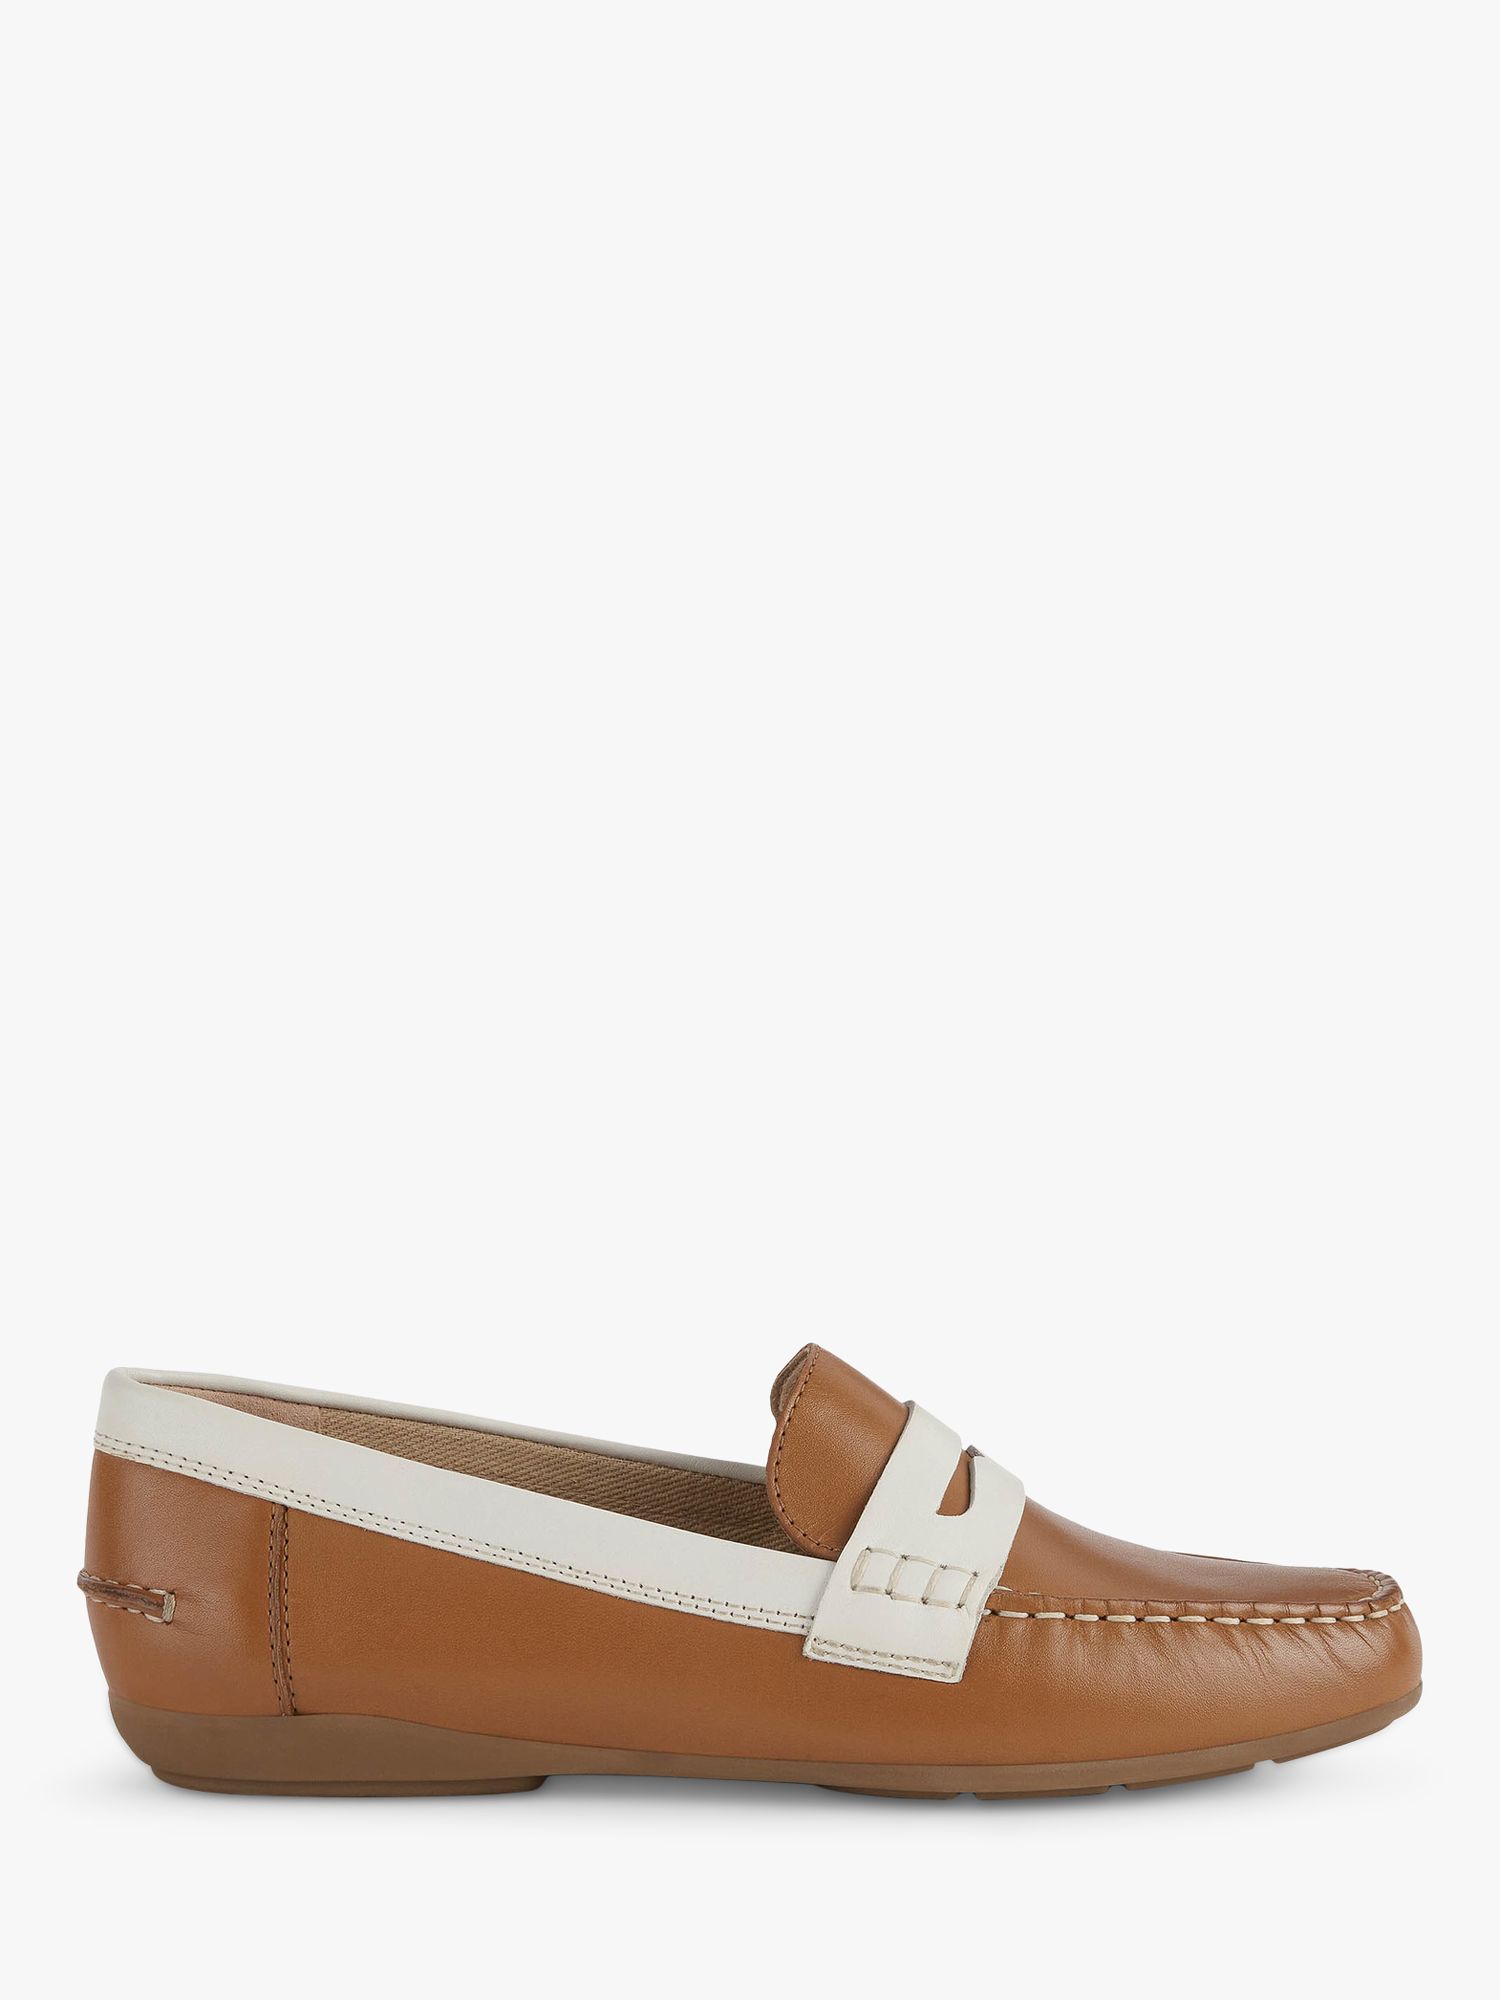 Geox Women's Annytah Wide Fit Leather at John Lewis & Partners